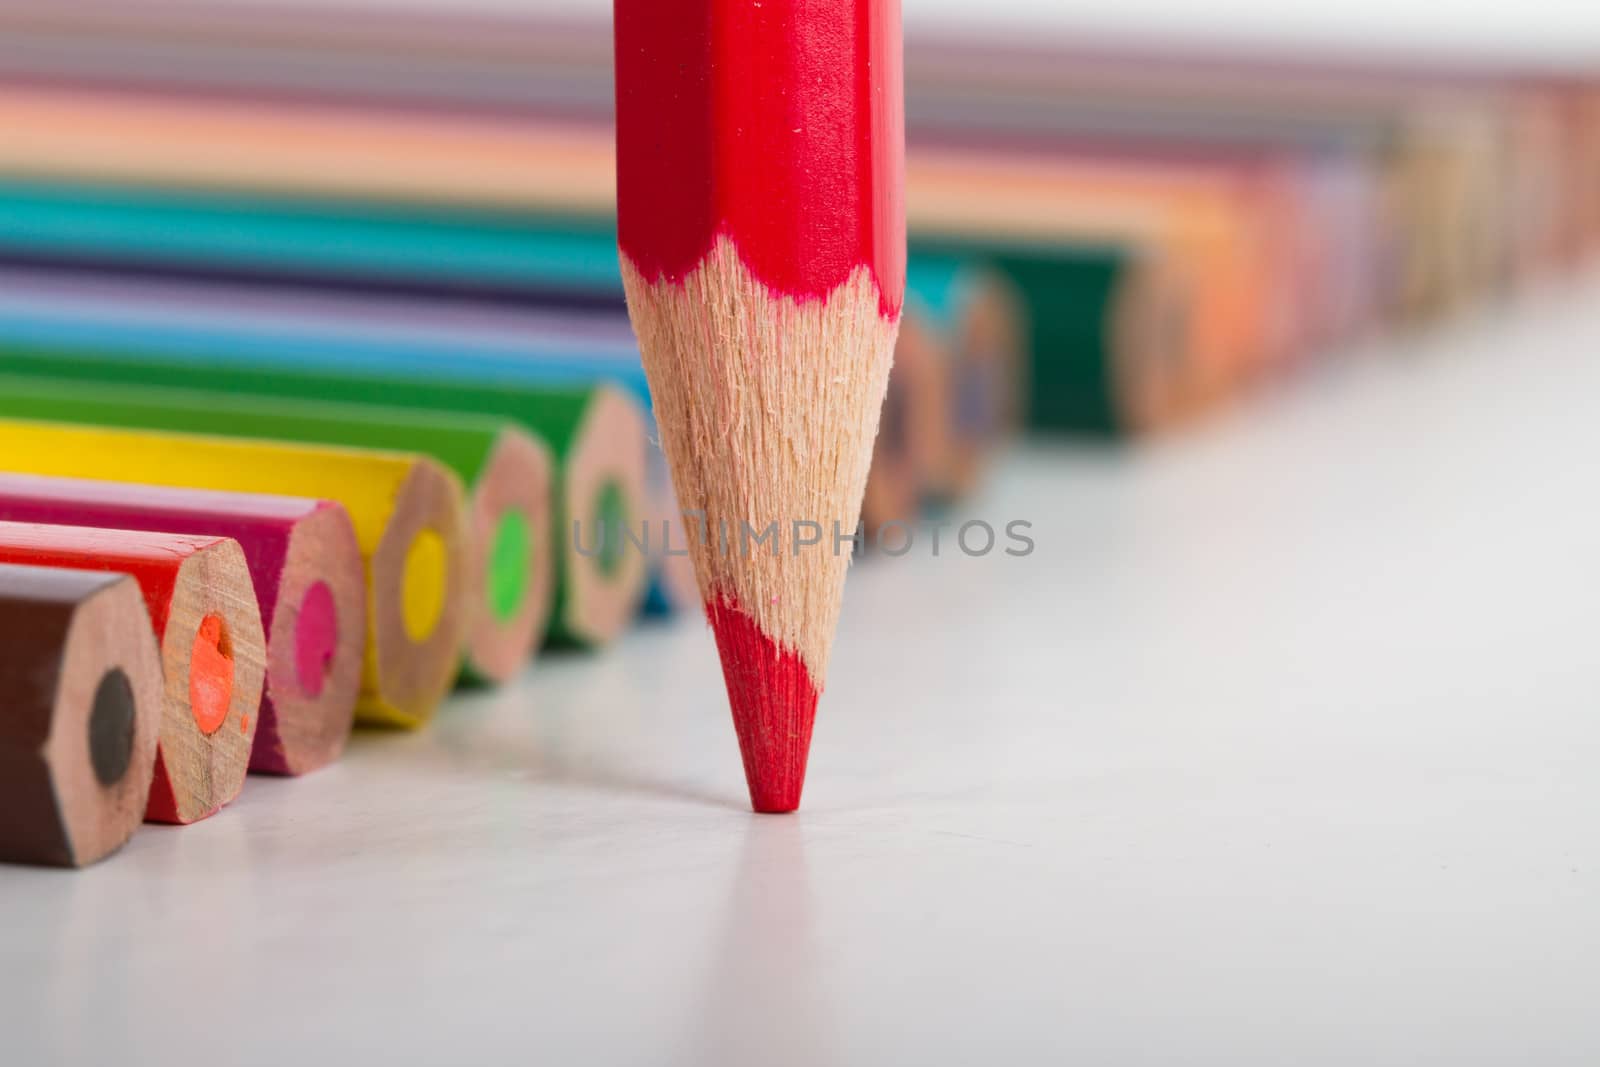 Colorful pencils, focused on red pencil, isolated on white background.